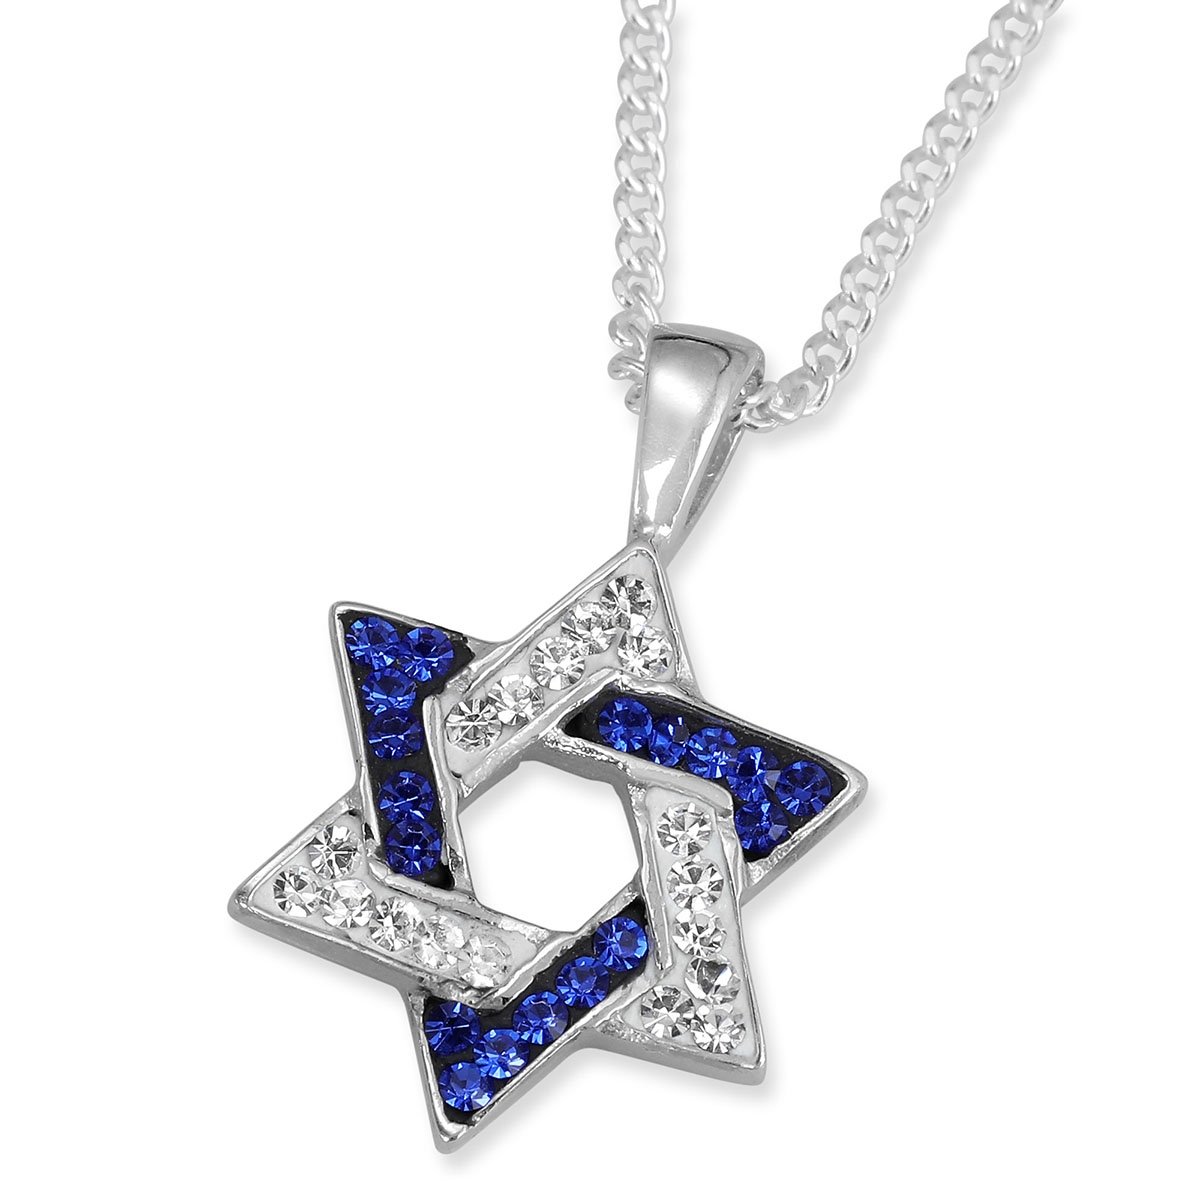 Zircon Stone-Encrusted 925 Sterling Silver Star of David Pendant Necklace - 1